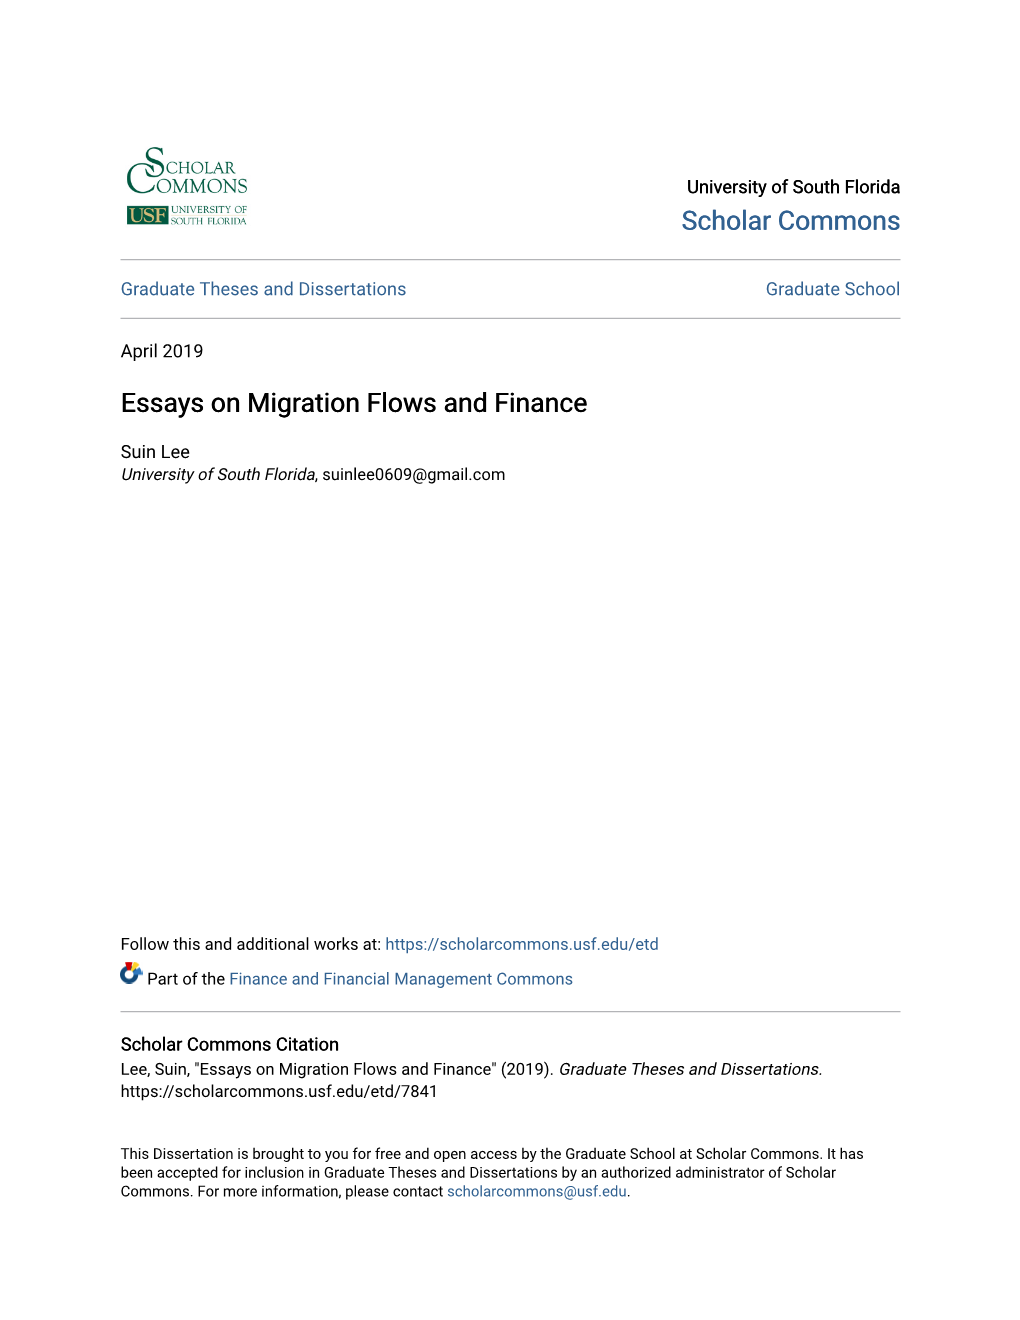 Essays on Migration Flows and Finance